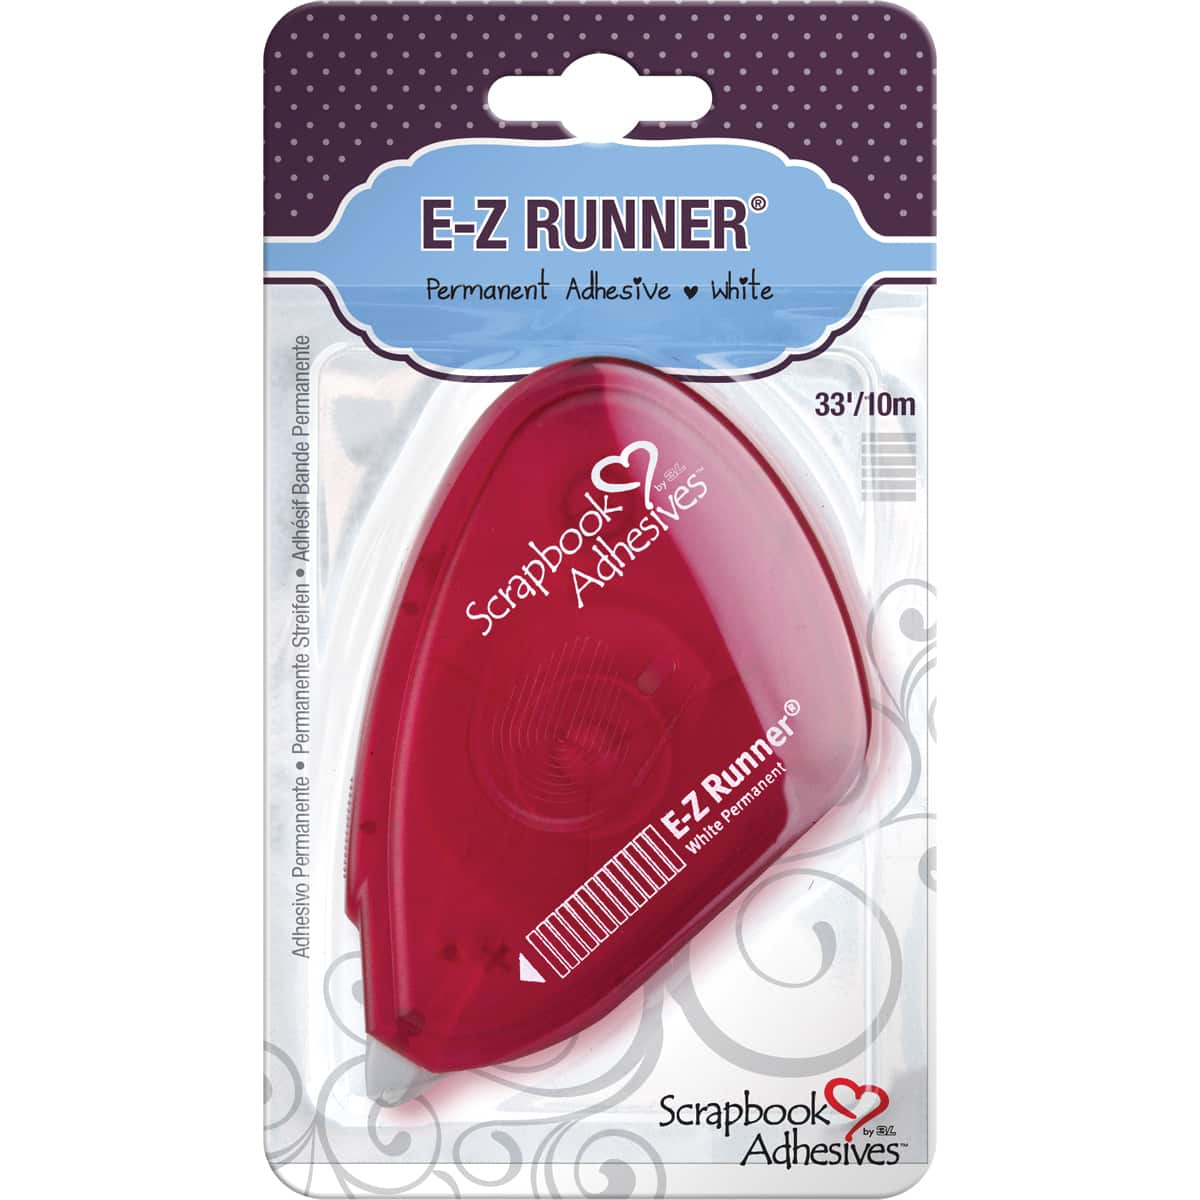 Scrapbook Adhesives by 3L® E-Z Runner® Permanent Adhesive